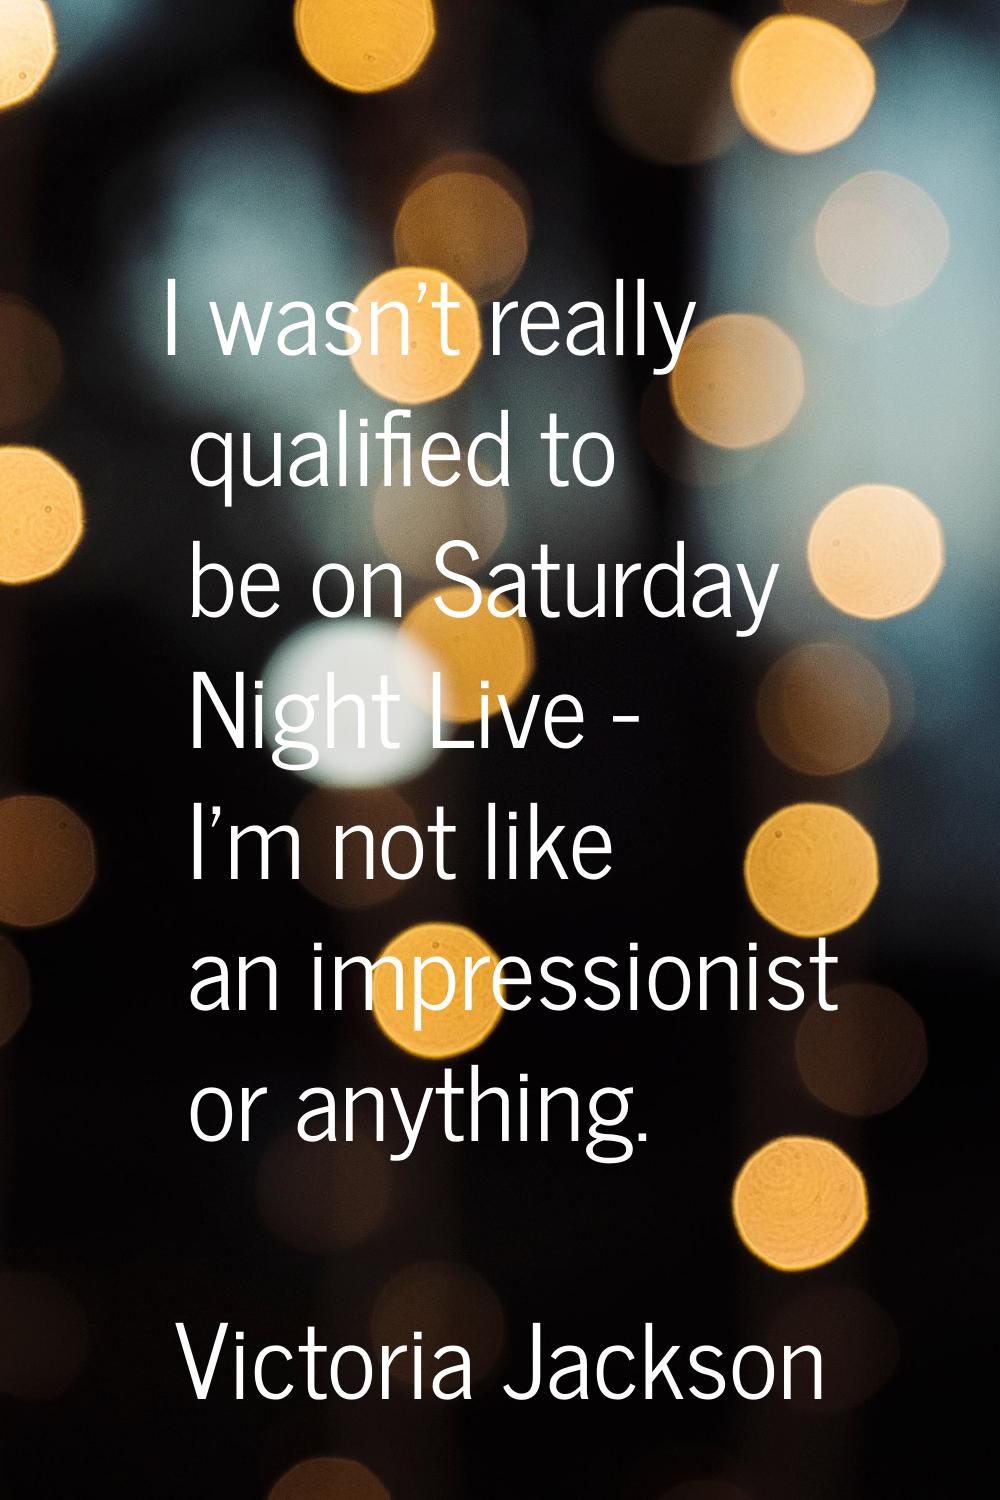 I wasn't really qualified to be on Saturday Night Live - I'm not like an impressionist or anything.